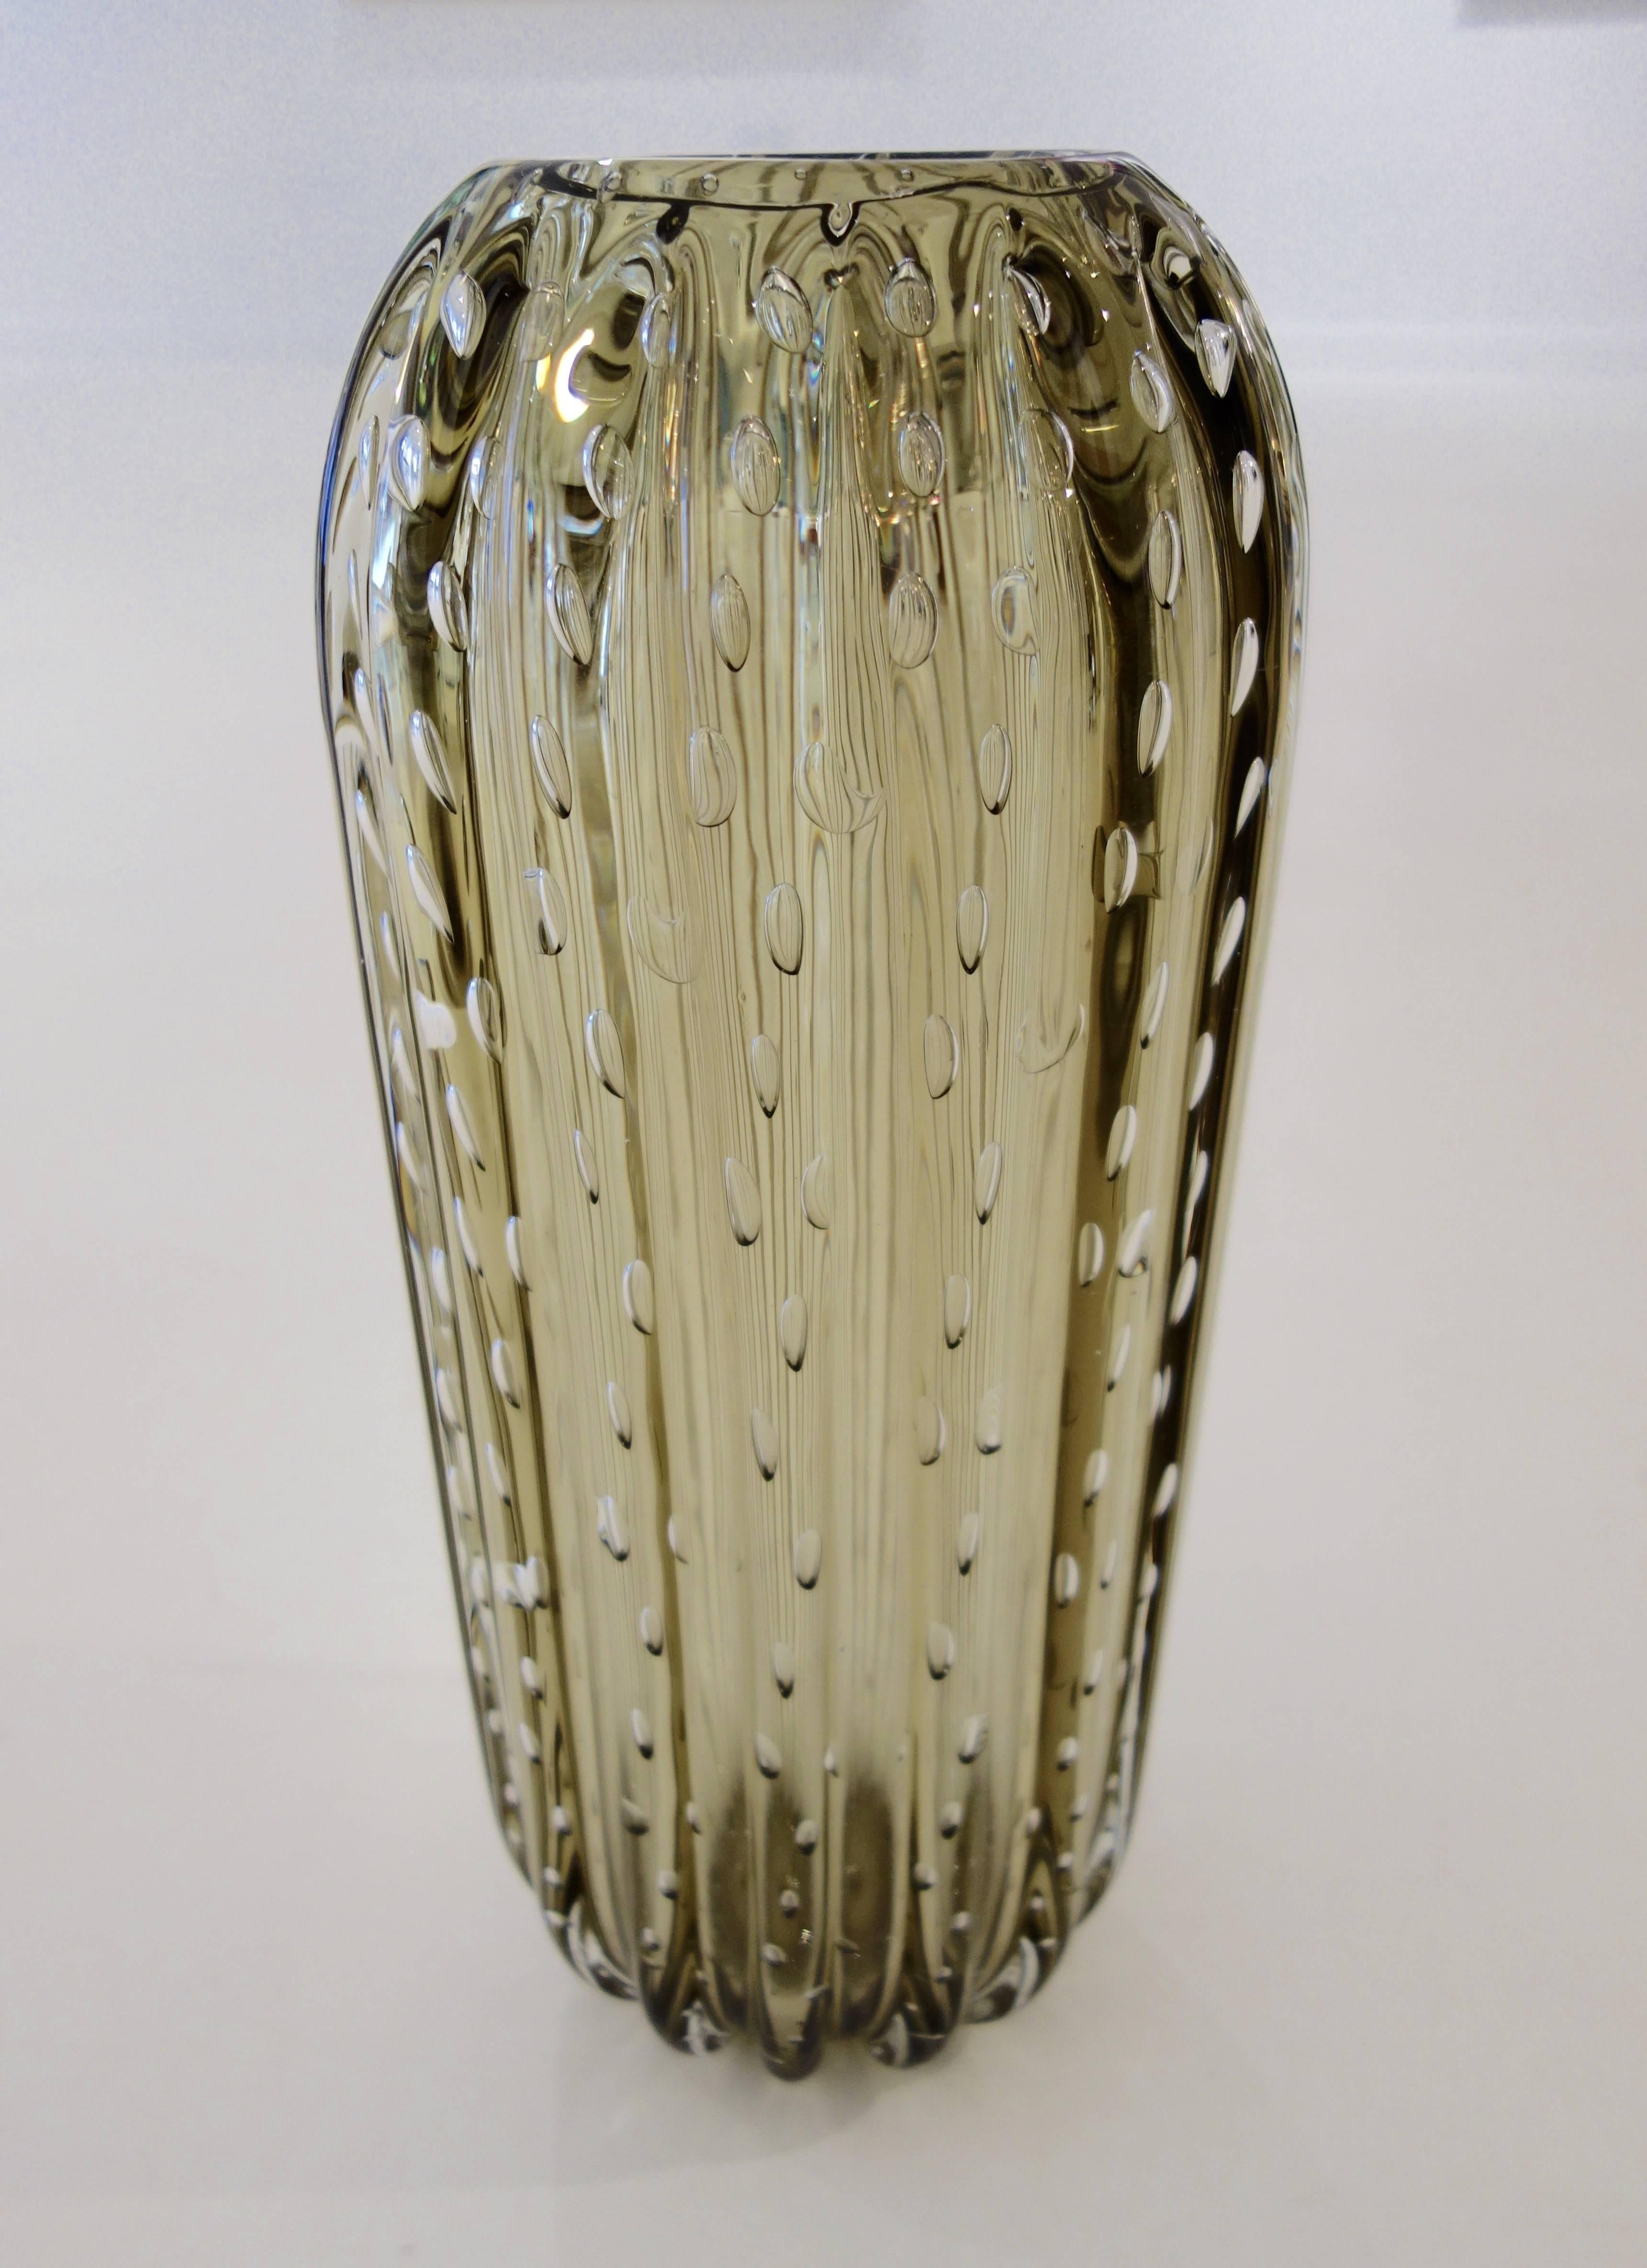 A set of three handblown thick, heavy Murano vessels by Alberto Dona in Pagliesco (straw) colored glass each fluted with controlled bubbles signed on the bottom. The dimensions of the largest listed below. The medium size vase is 14.5